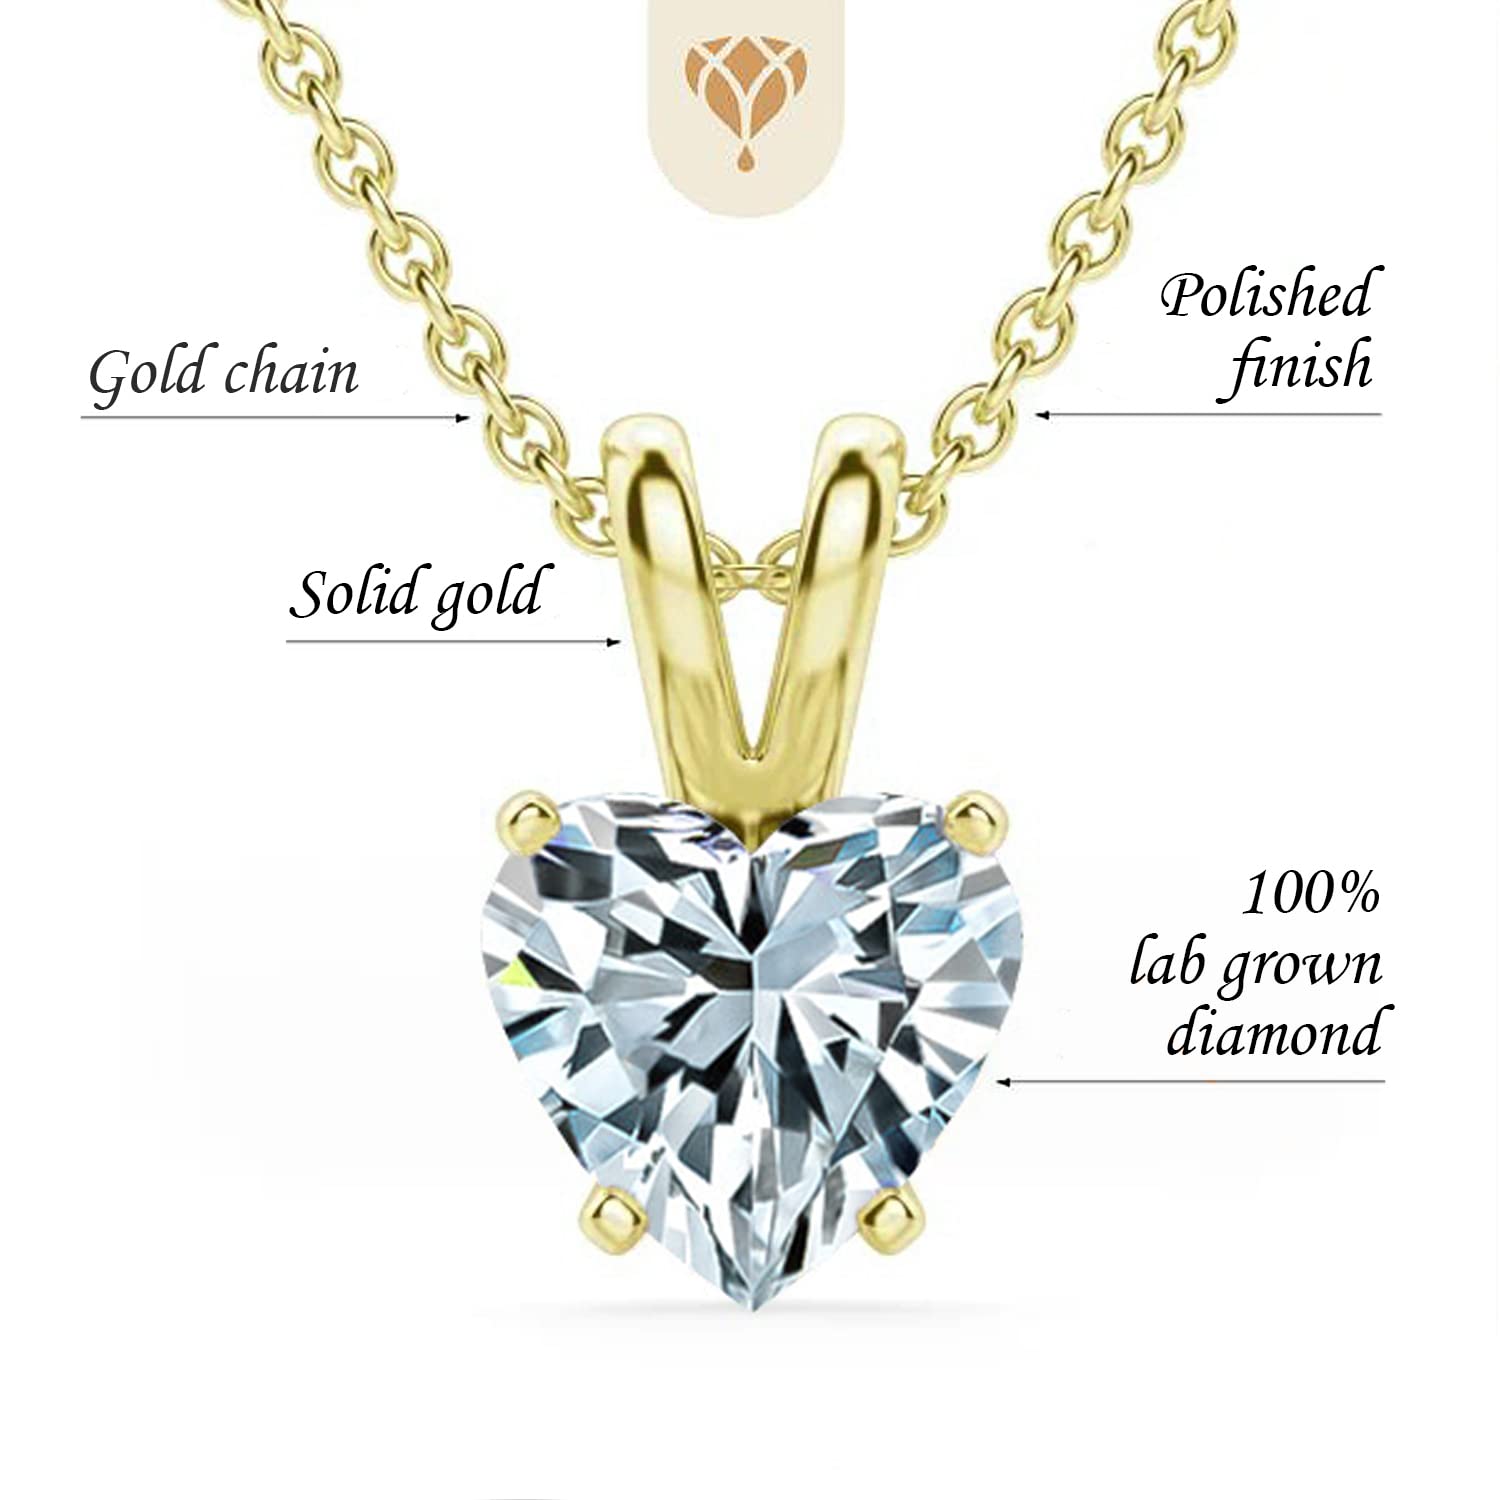 The Diamond Deal .25-1.00 Carat Heart Shape Brilliant Solitaire Lab-Grown Diamond Solitaire Pendant Necklace For Women Girls infants | 14k Yellow or White or Rose/Pink Gold With 18